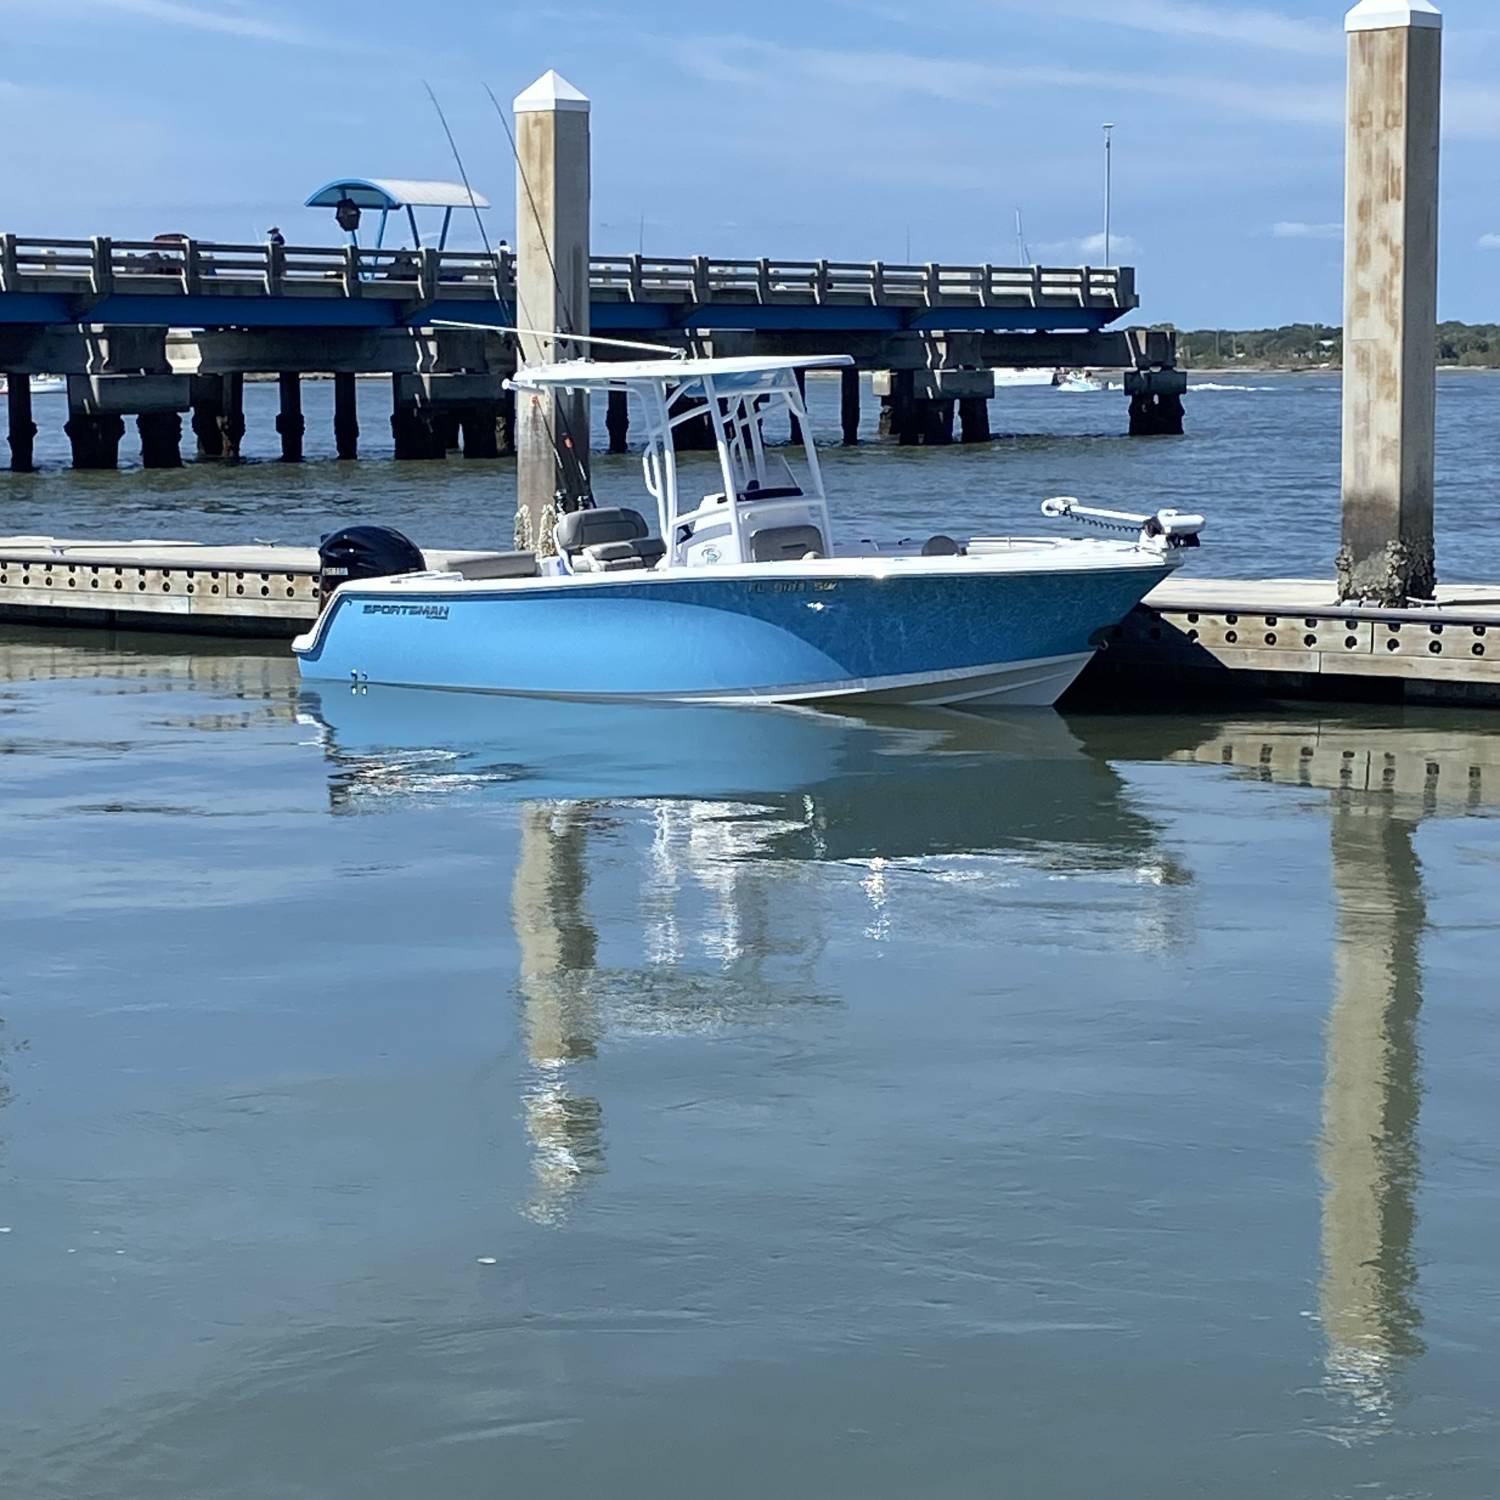 Title: Docked for lunch - On board their Sportsman Open 232 Center Console - Location: St Augustine. Participating in the Photo Contest #SportsmanMay2023